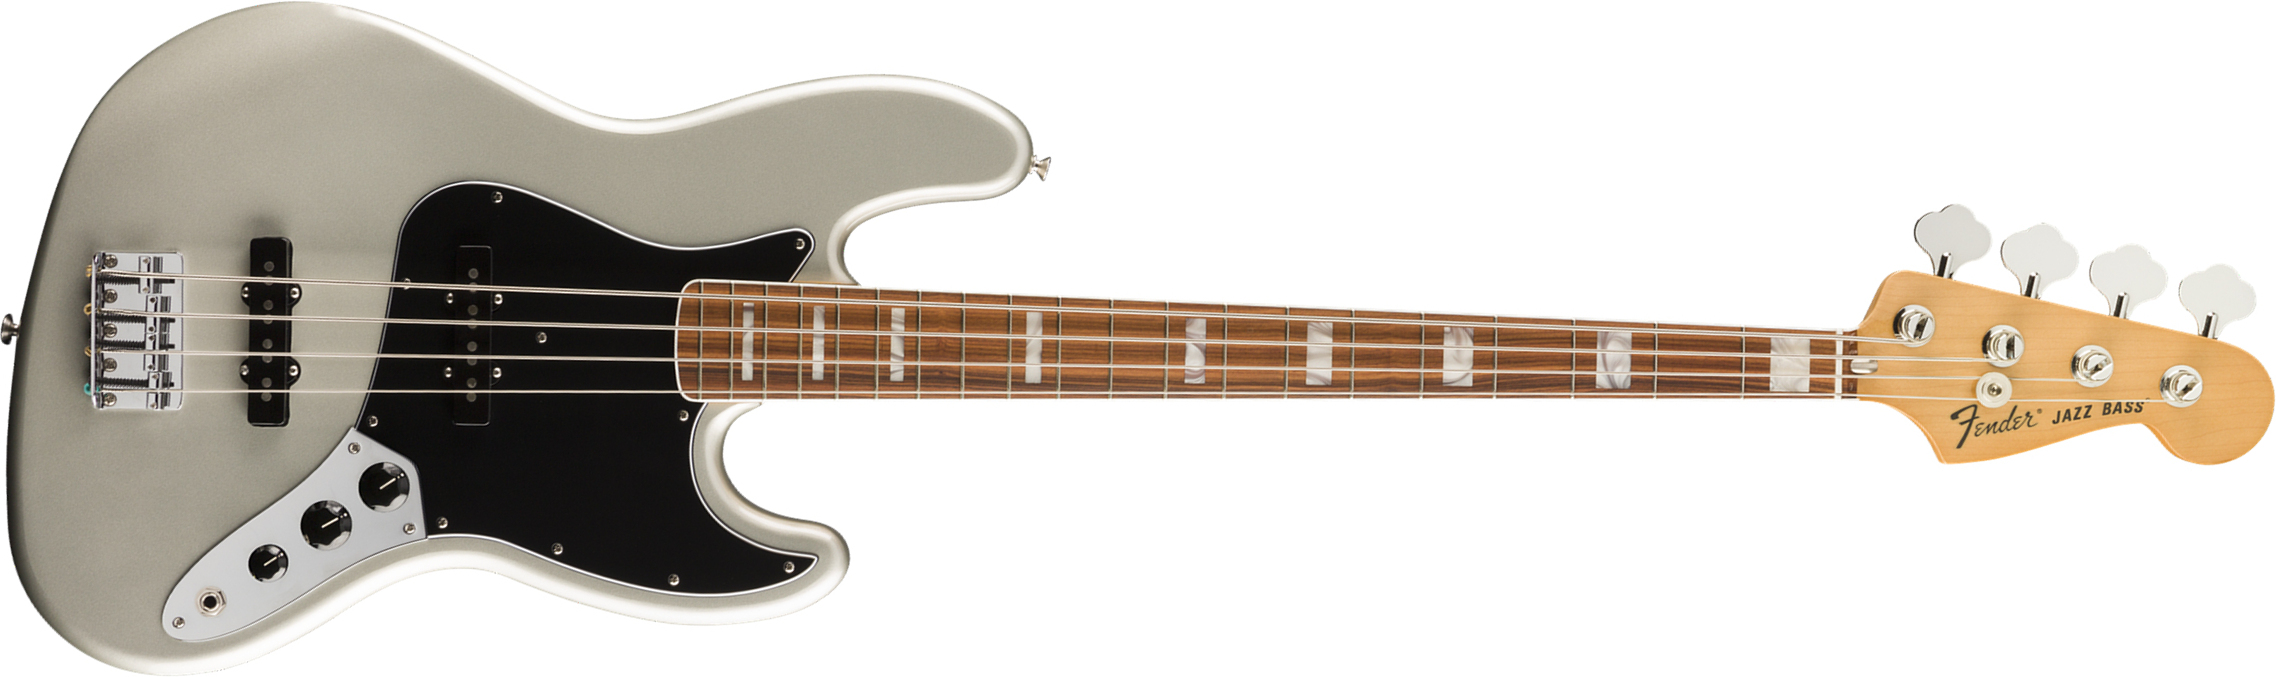 Fender Jazz Bass 70s Vintera Vintage Mex Pf - Inca Silver - Solid body electric bass - Main picture